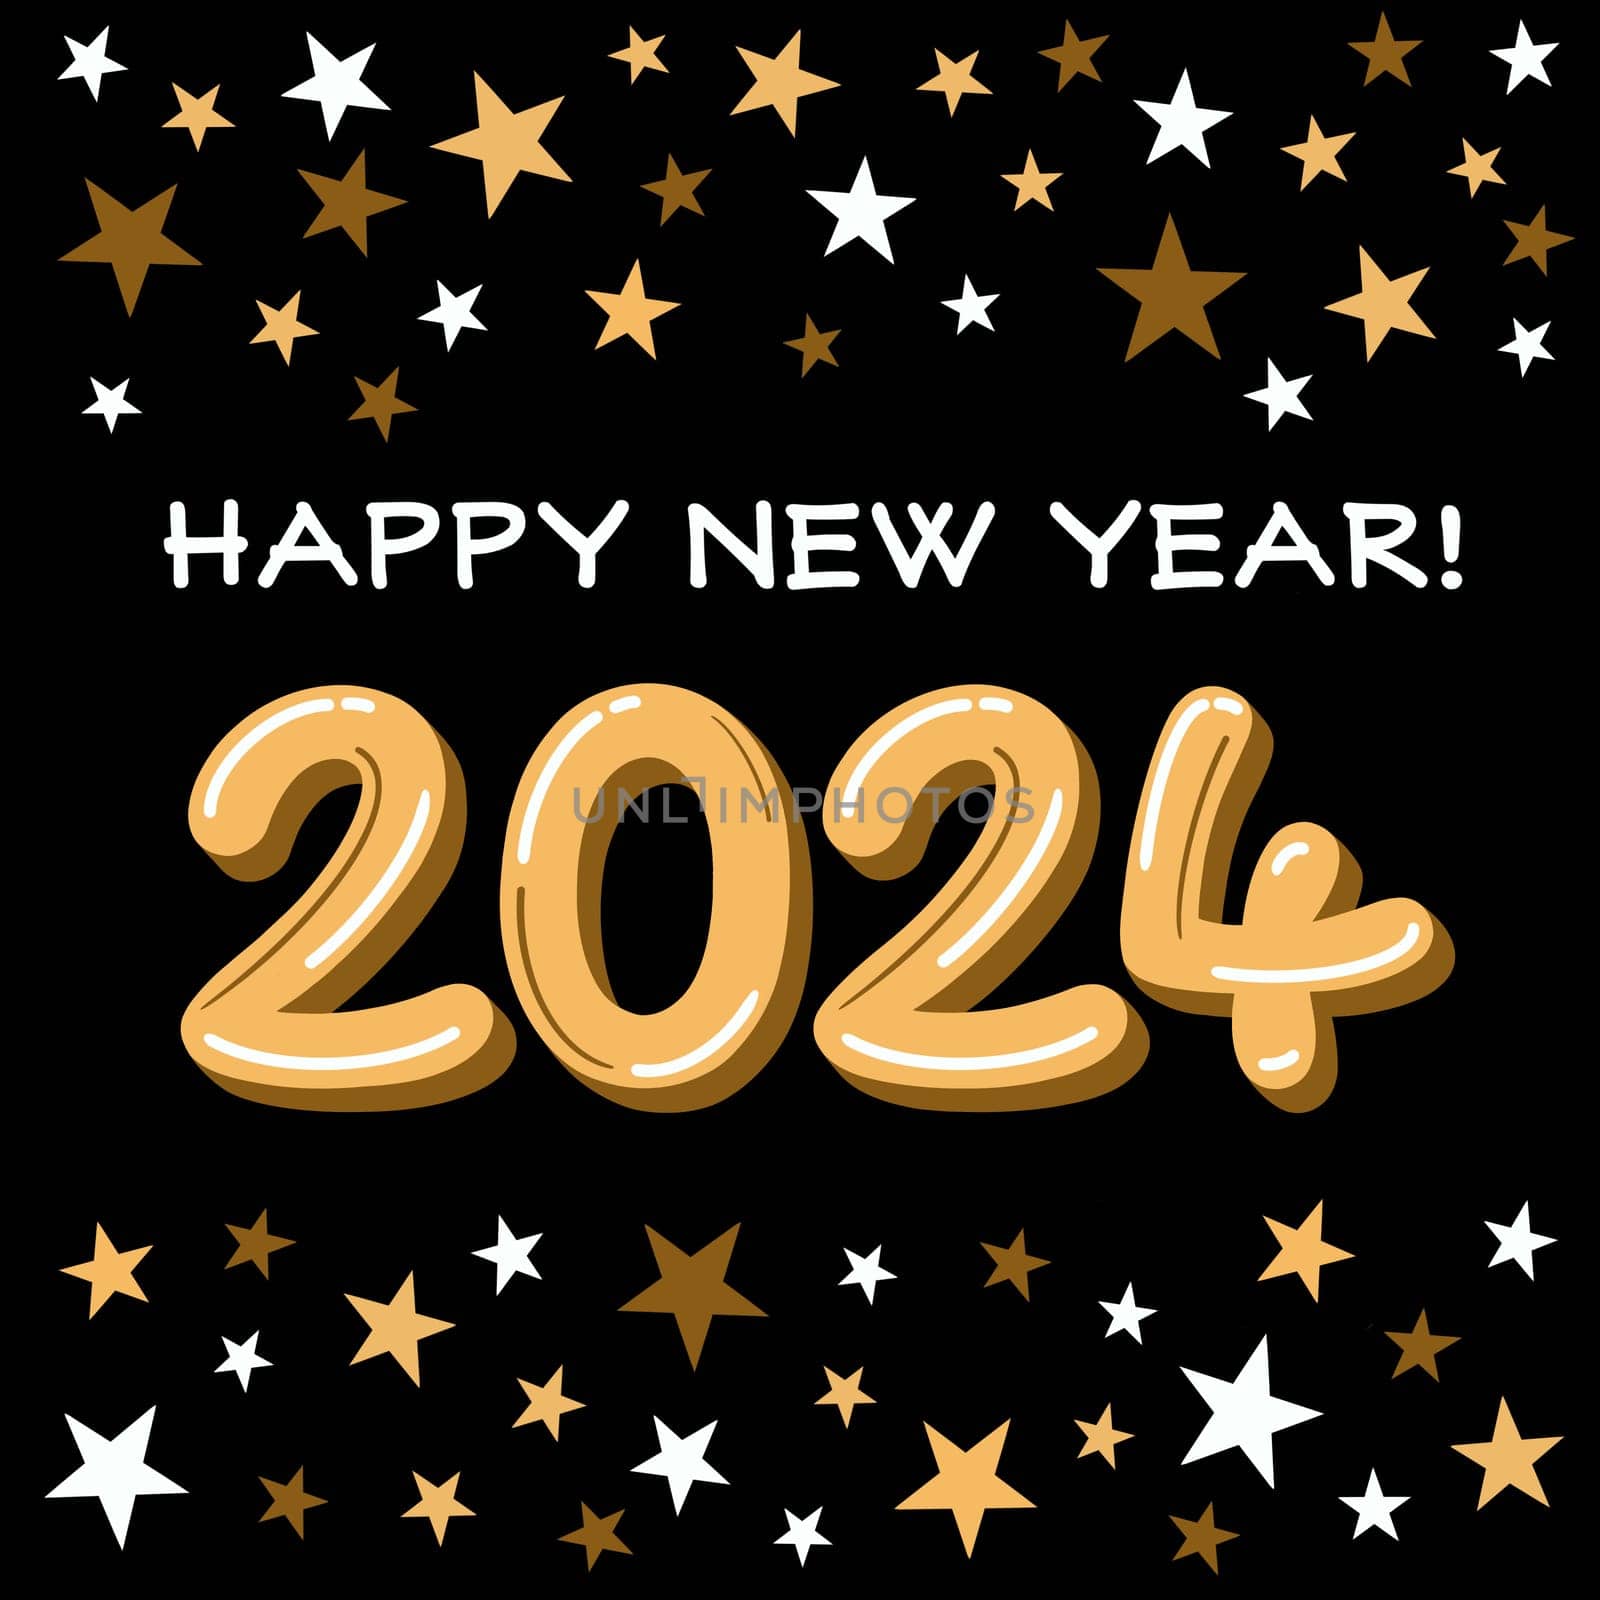 Happy new year illustration in classic gold and black. Shiny gold 2024 on a black background. Sparkling stars like fireworks or sparklers surround the numbers. Quirky New Year celebration image. Champagne coloured numbers.